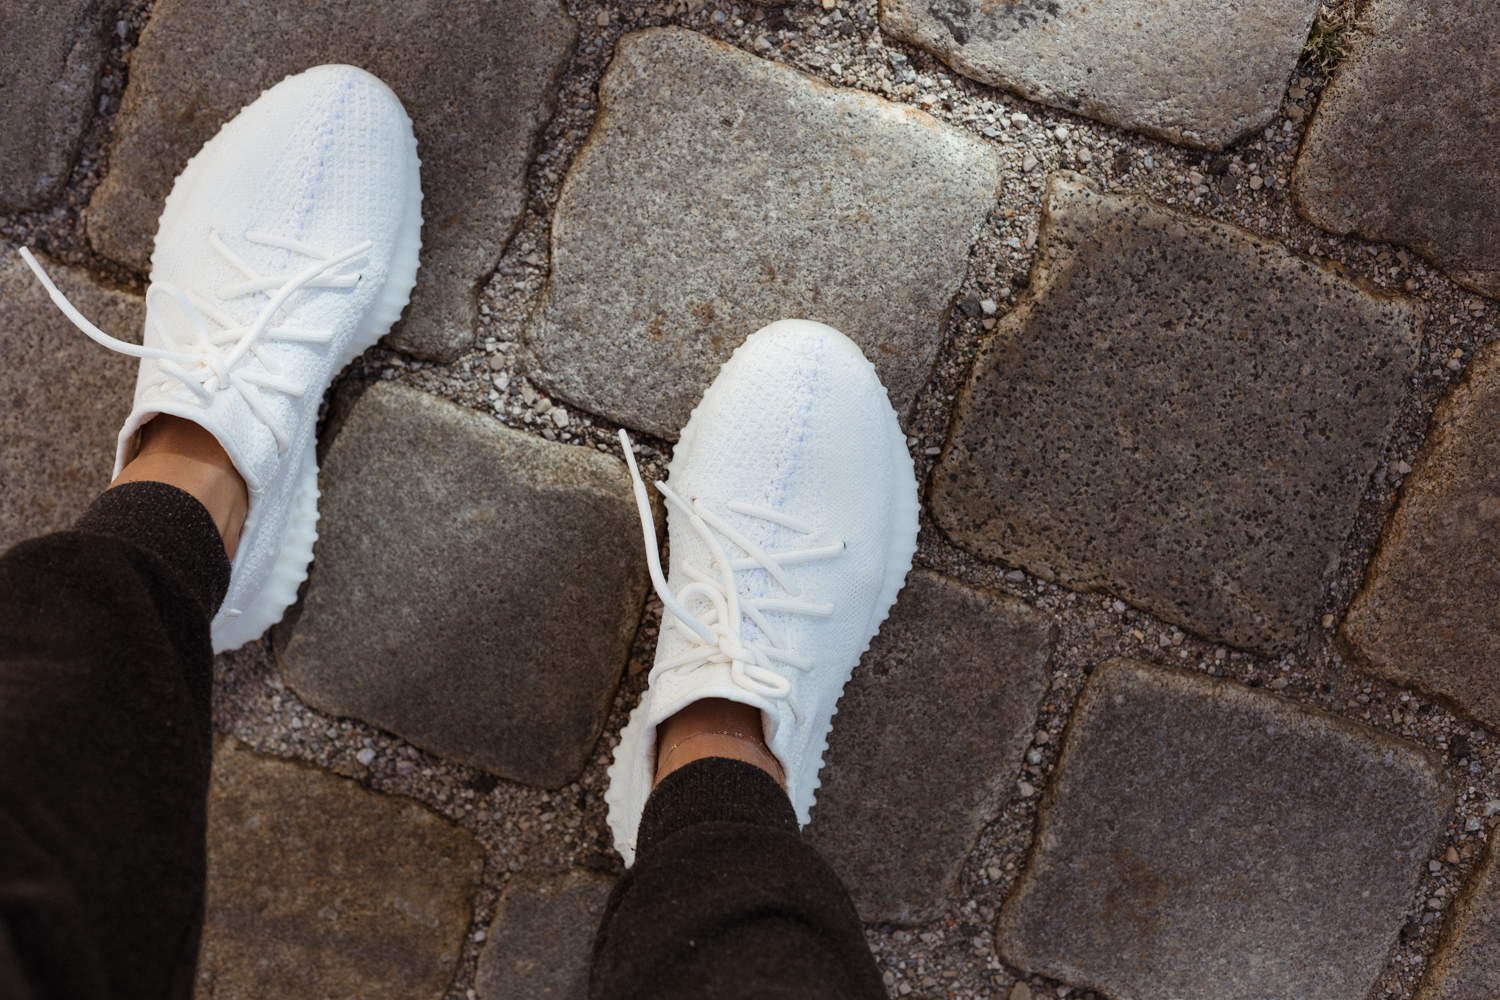 yeezy 350 v2 triple white outfit